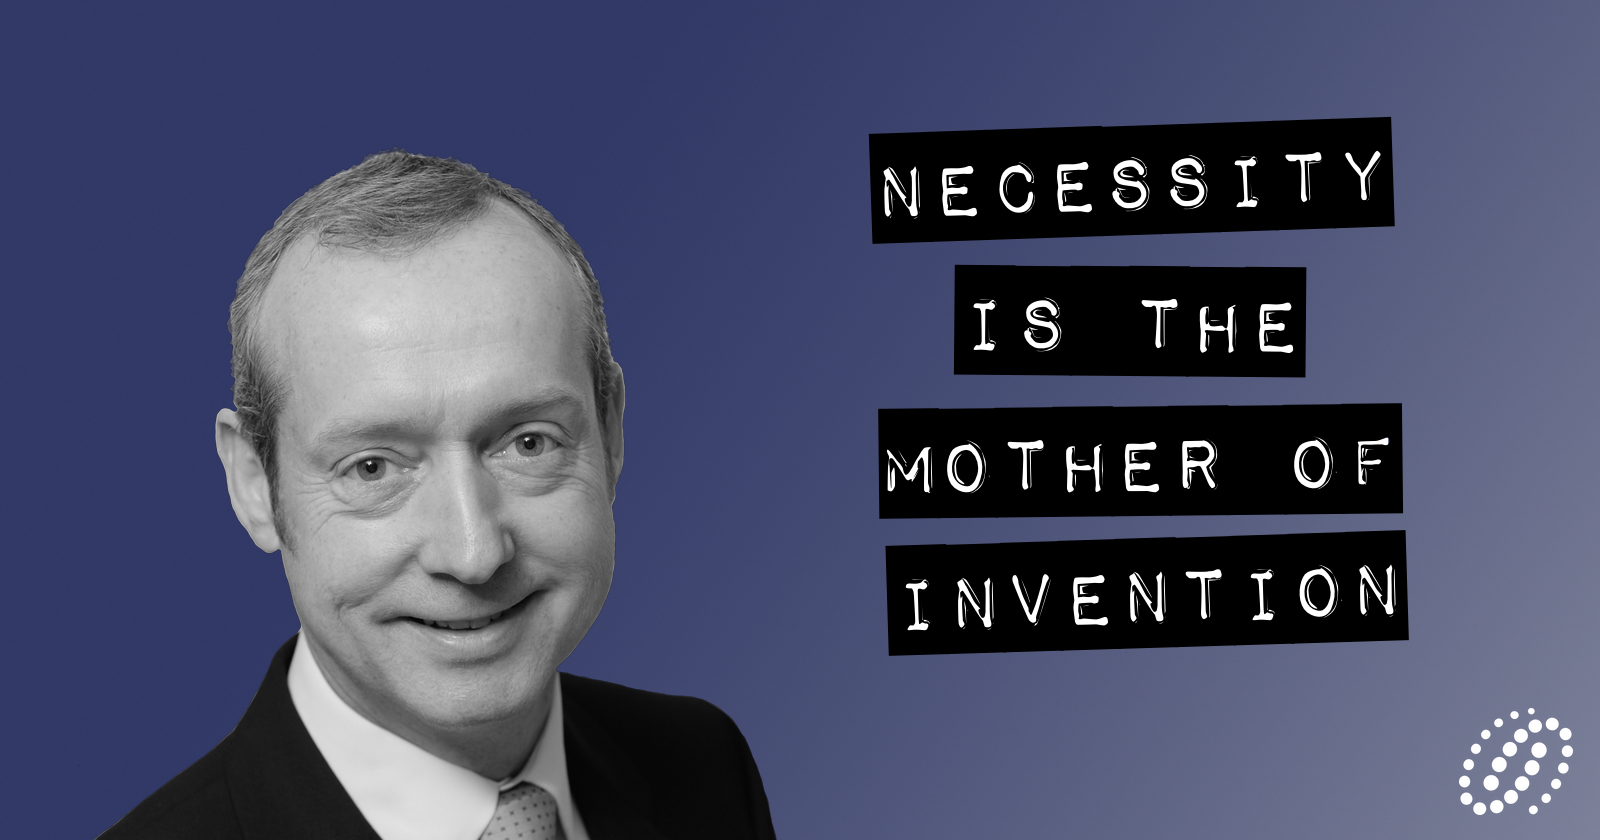 Necessity is the mother of invention Image – LinkedIn